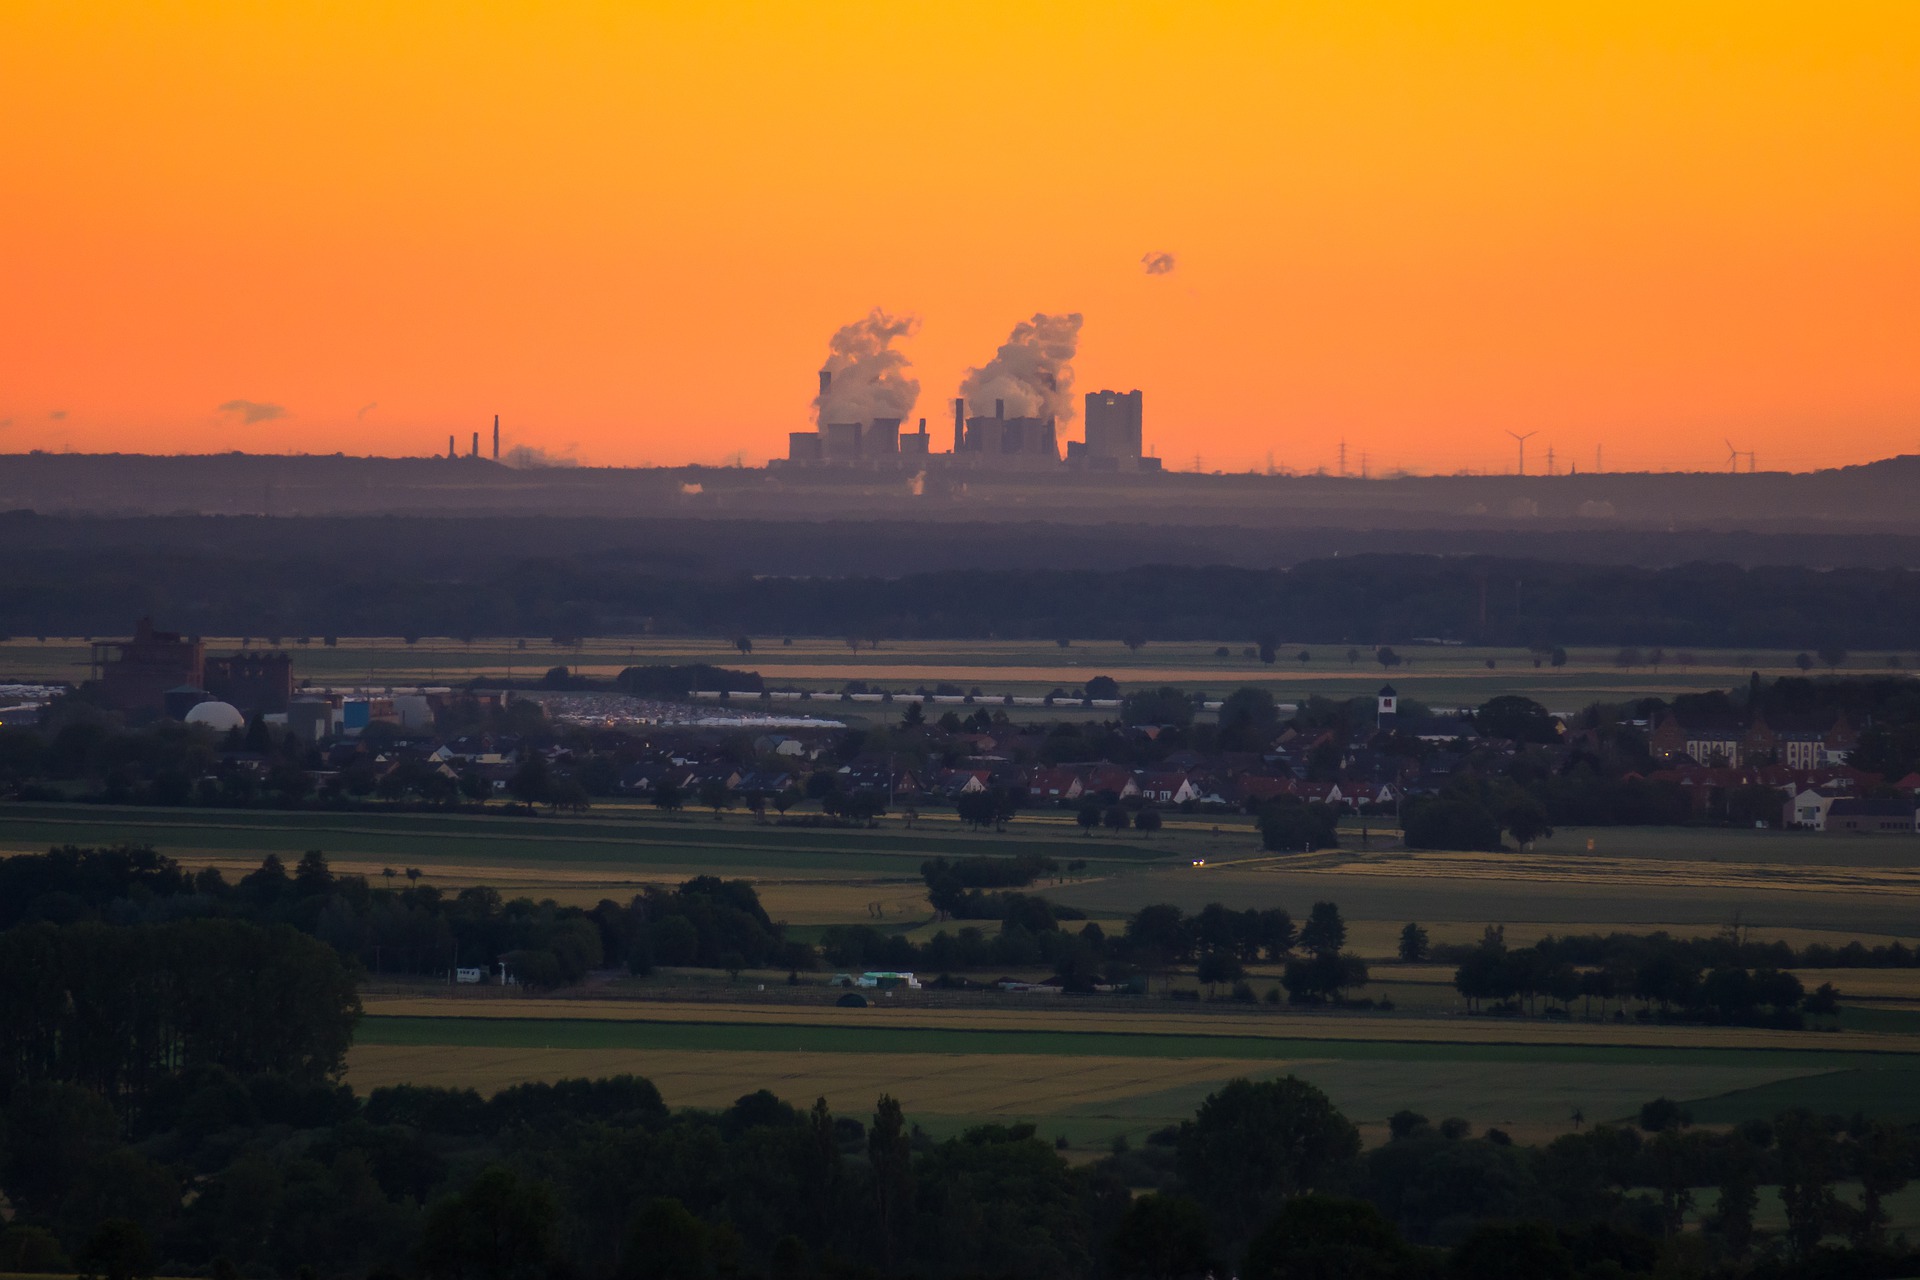 Skyline view of a power plant at dusk, with orange sky